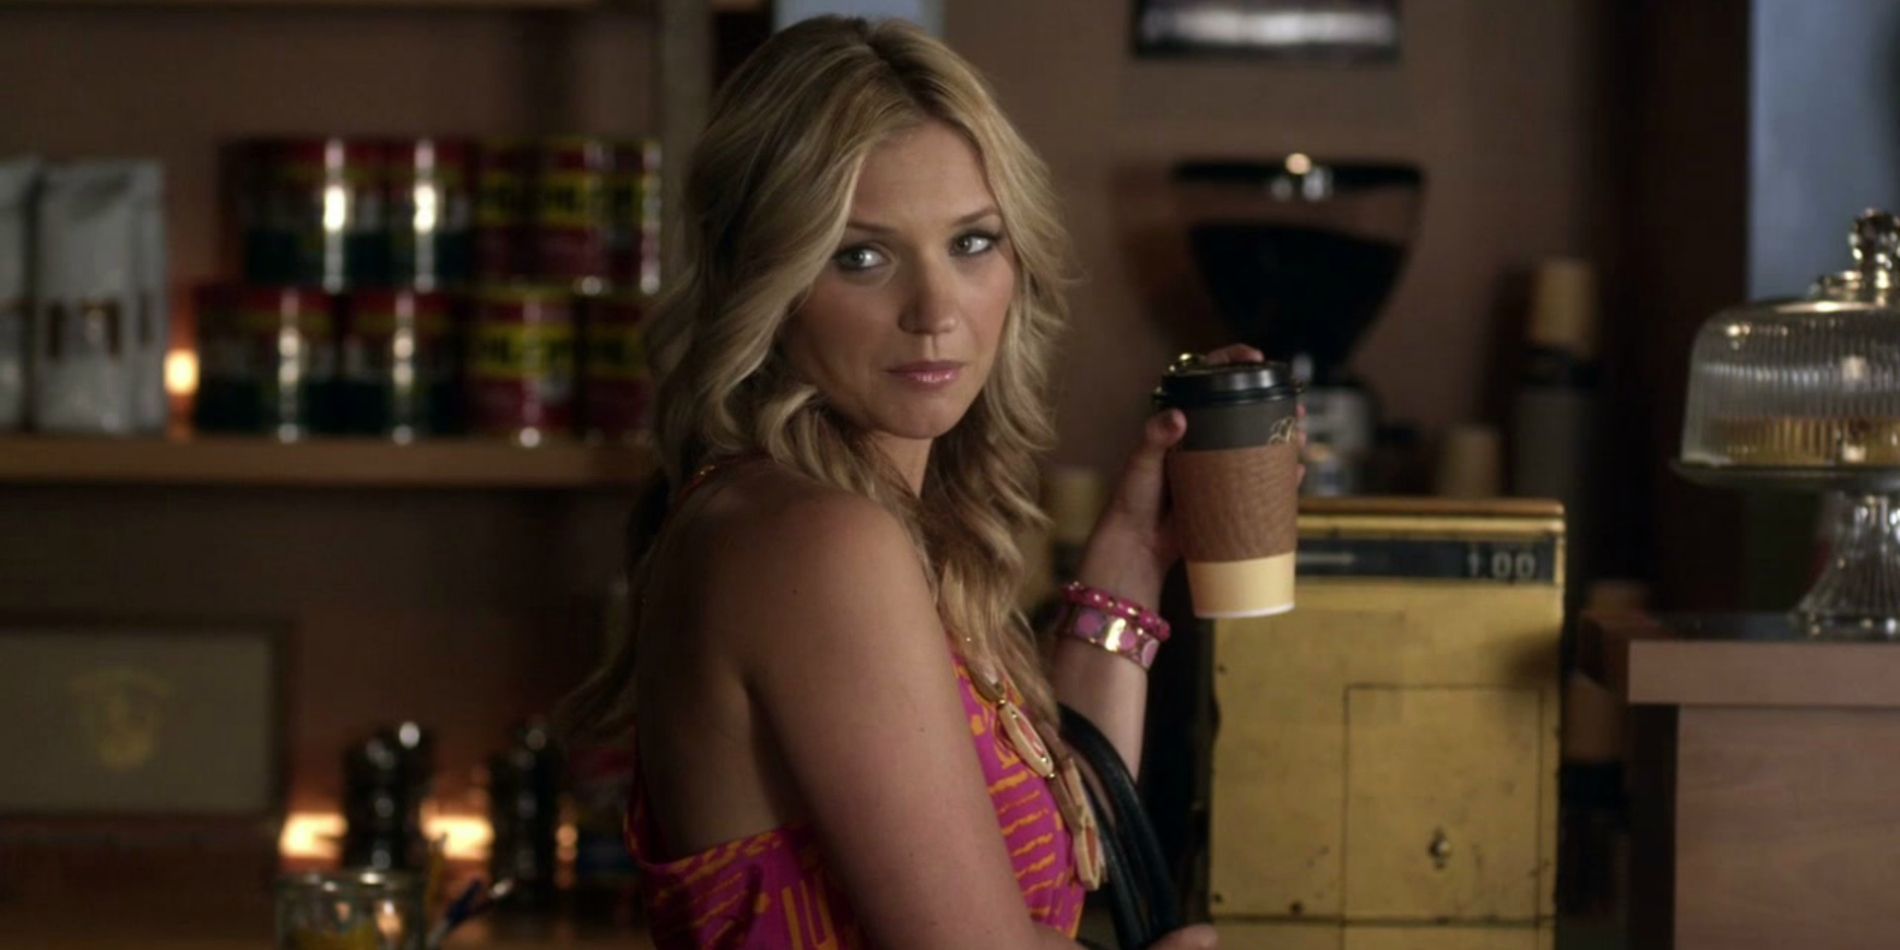 Charlotte holding a cup of coffee in Pretty Little Liars